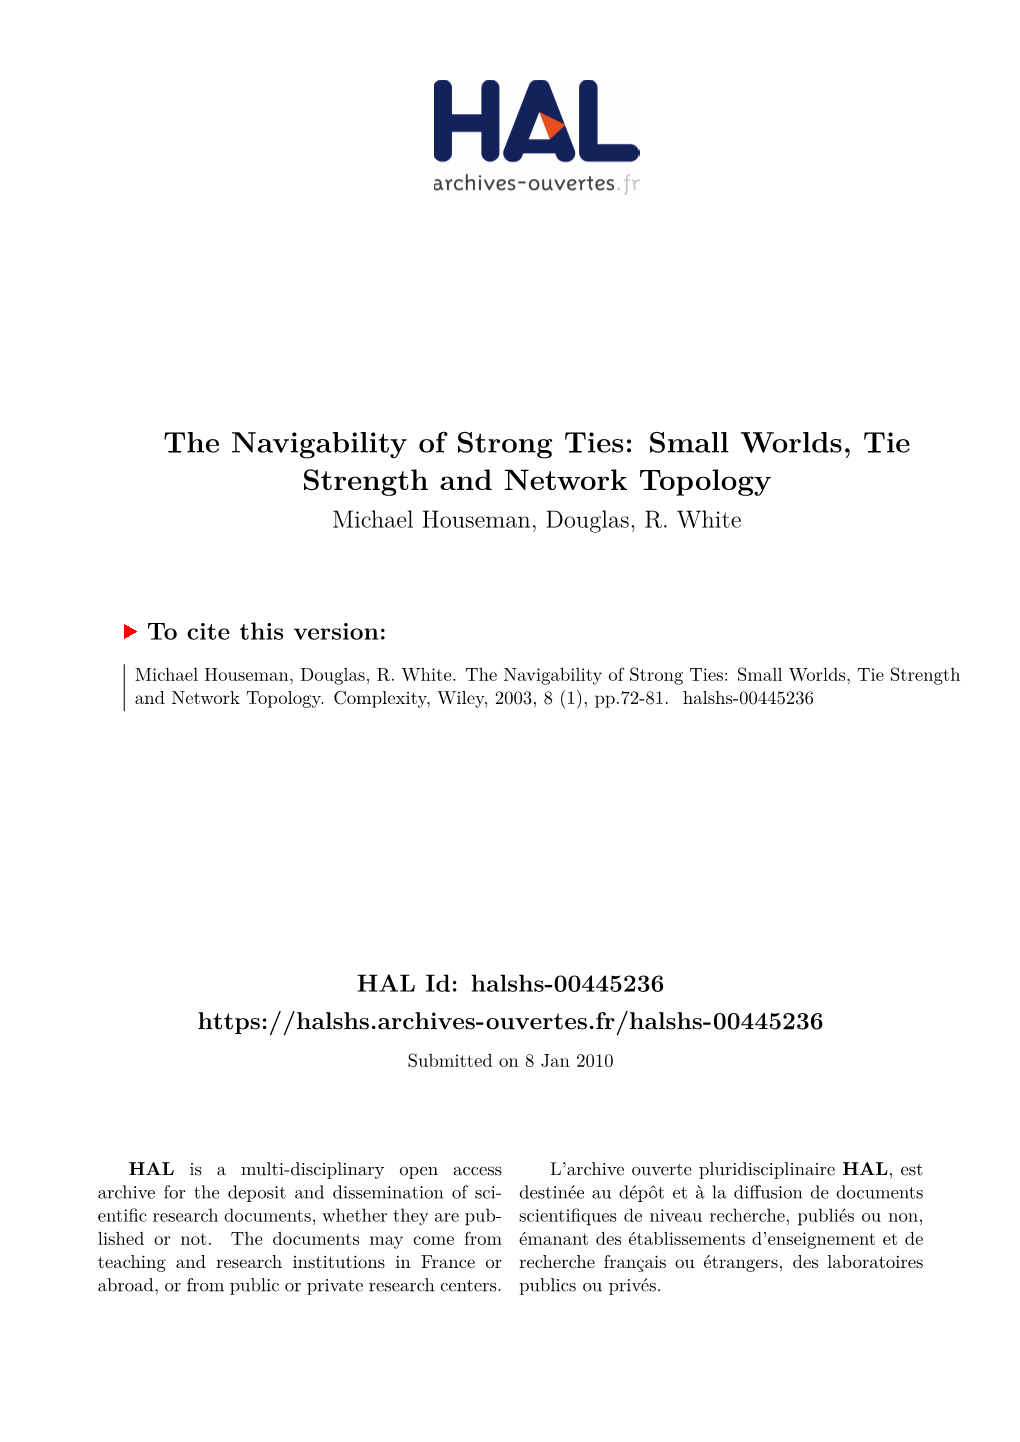 The Navigability of Strong Ties: Small Worlds, Tie Strength and Network Topology Michael Houseman, Douglas, R